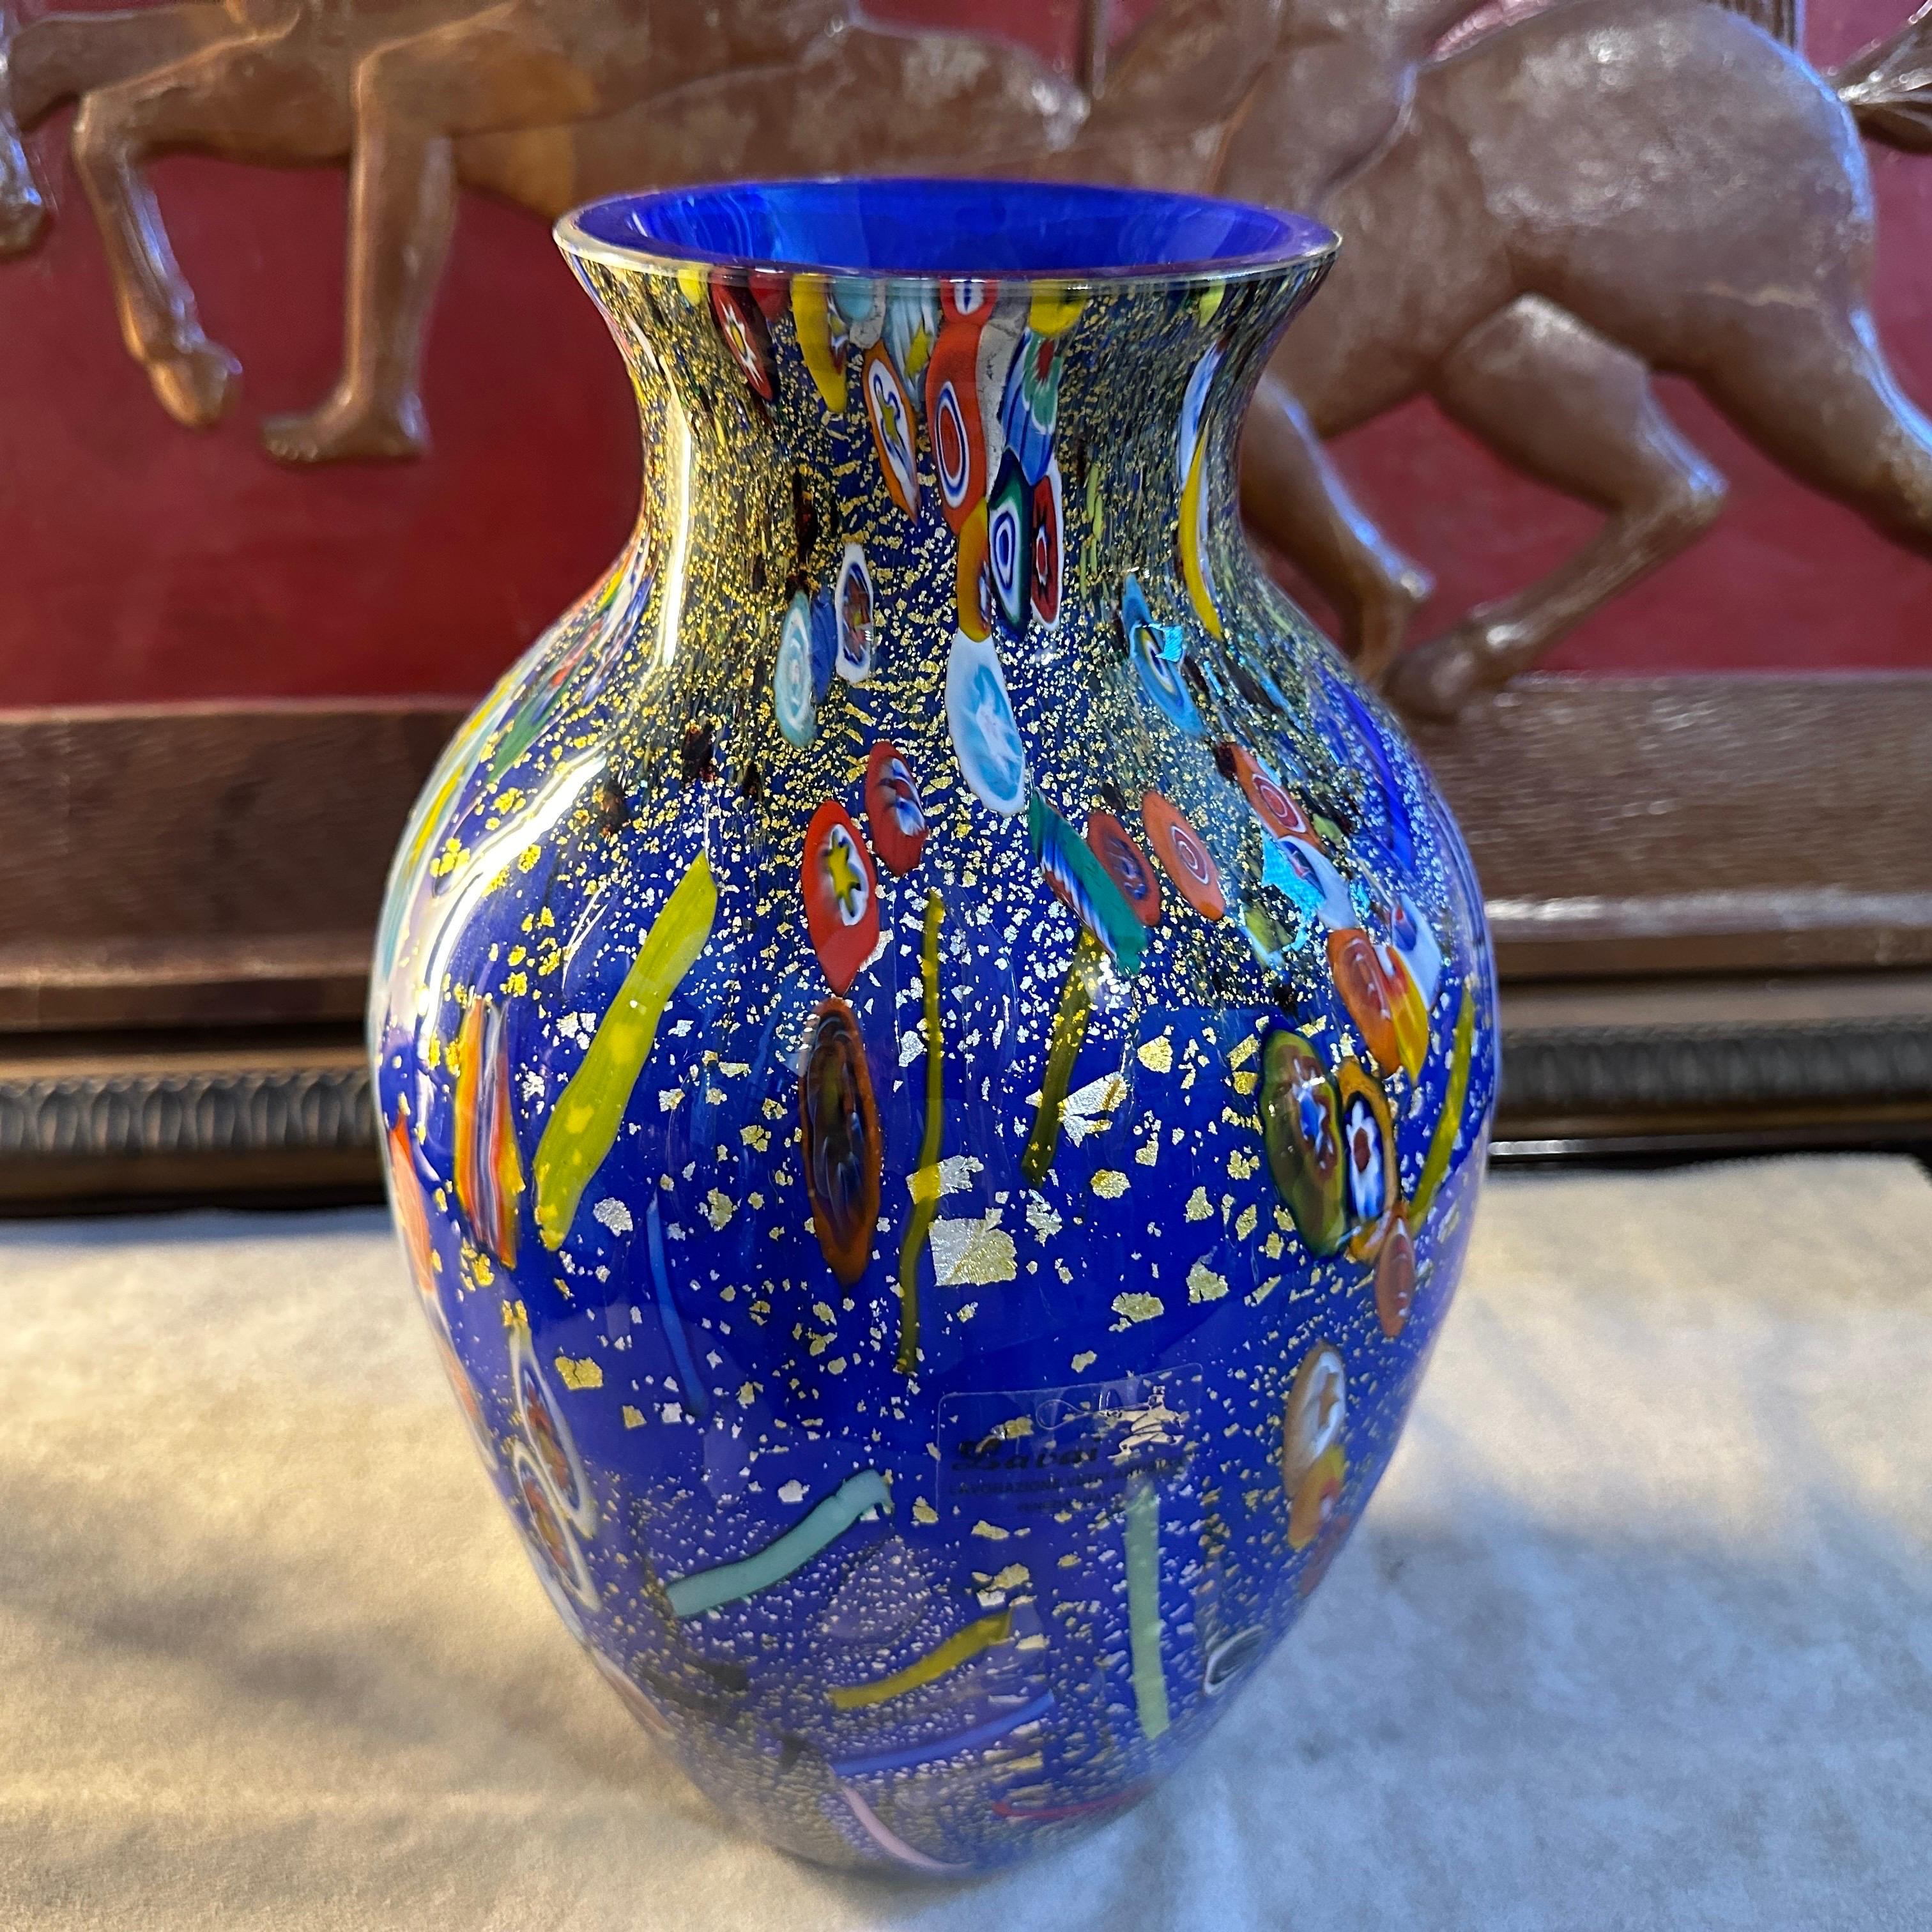 A particular blue Murano glass vase with murrine inserts in the style of Dino Martens, made in Italy in the 1980s, it's a unique piece. The vase is a captivating and exquisite piece that showcases the renowned craftsmanship and artistry of Murano